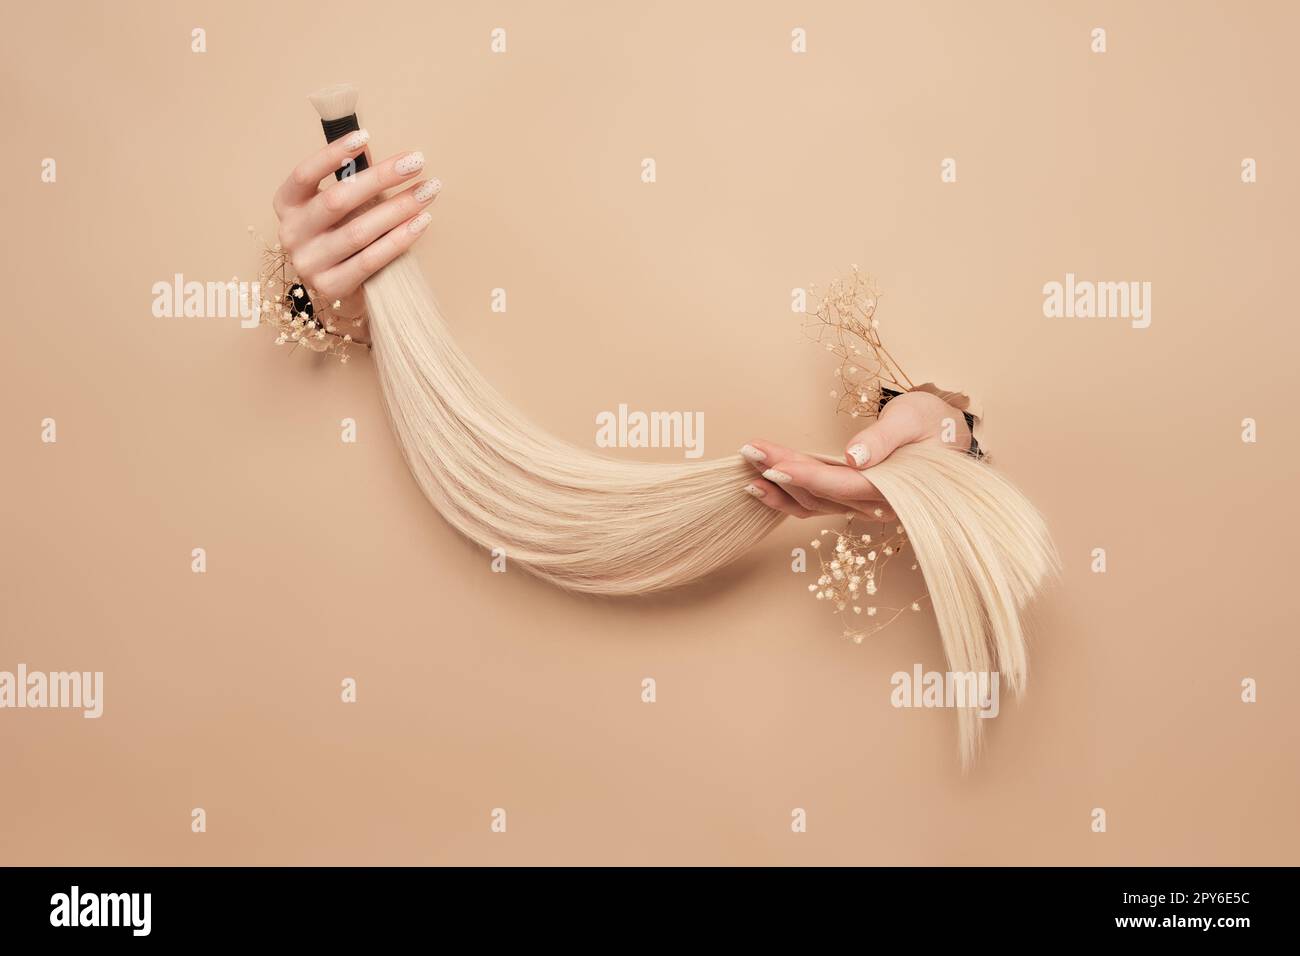 Hands with flowers hold strands of hair for extensions on a beige background. Stock Photo